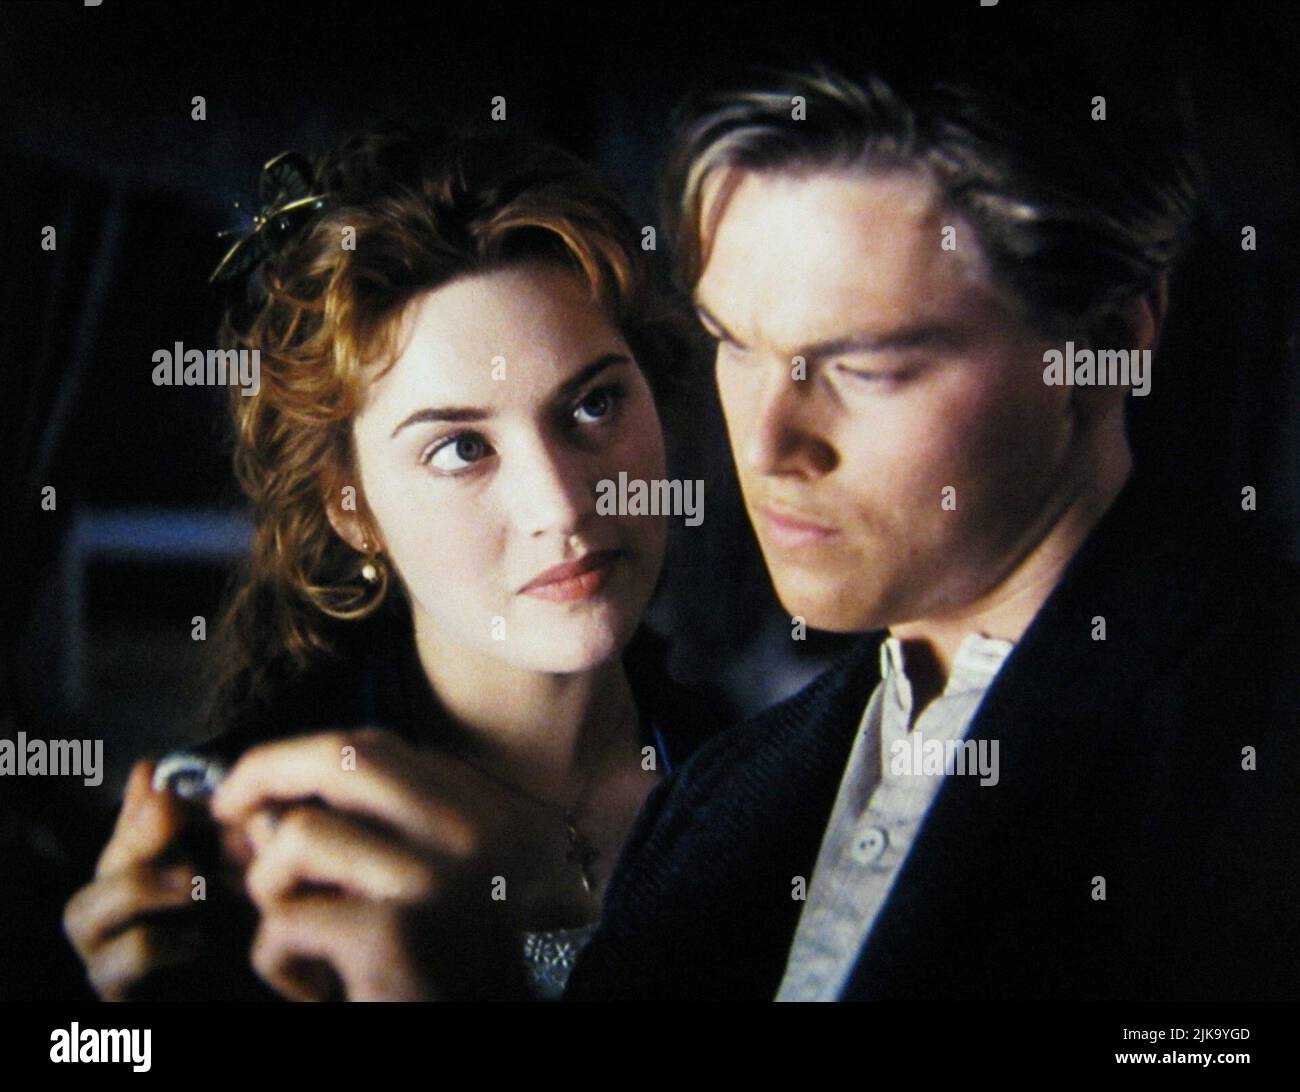 Kate Winslet On Titanic Door And People Criticising Her Weight